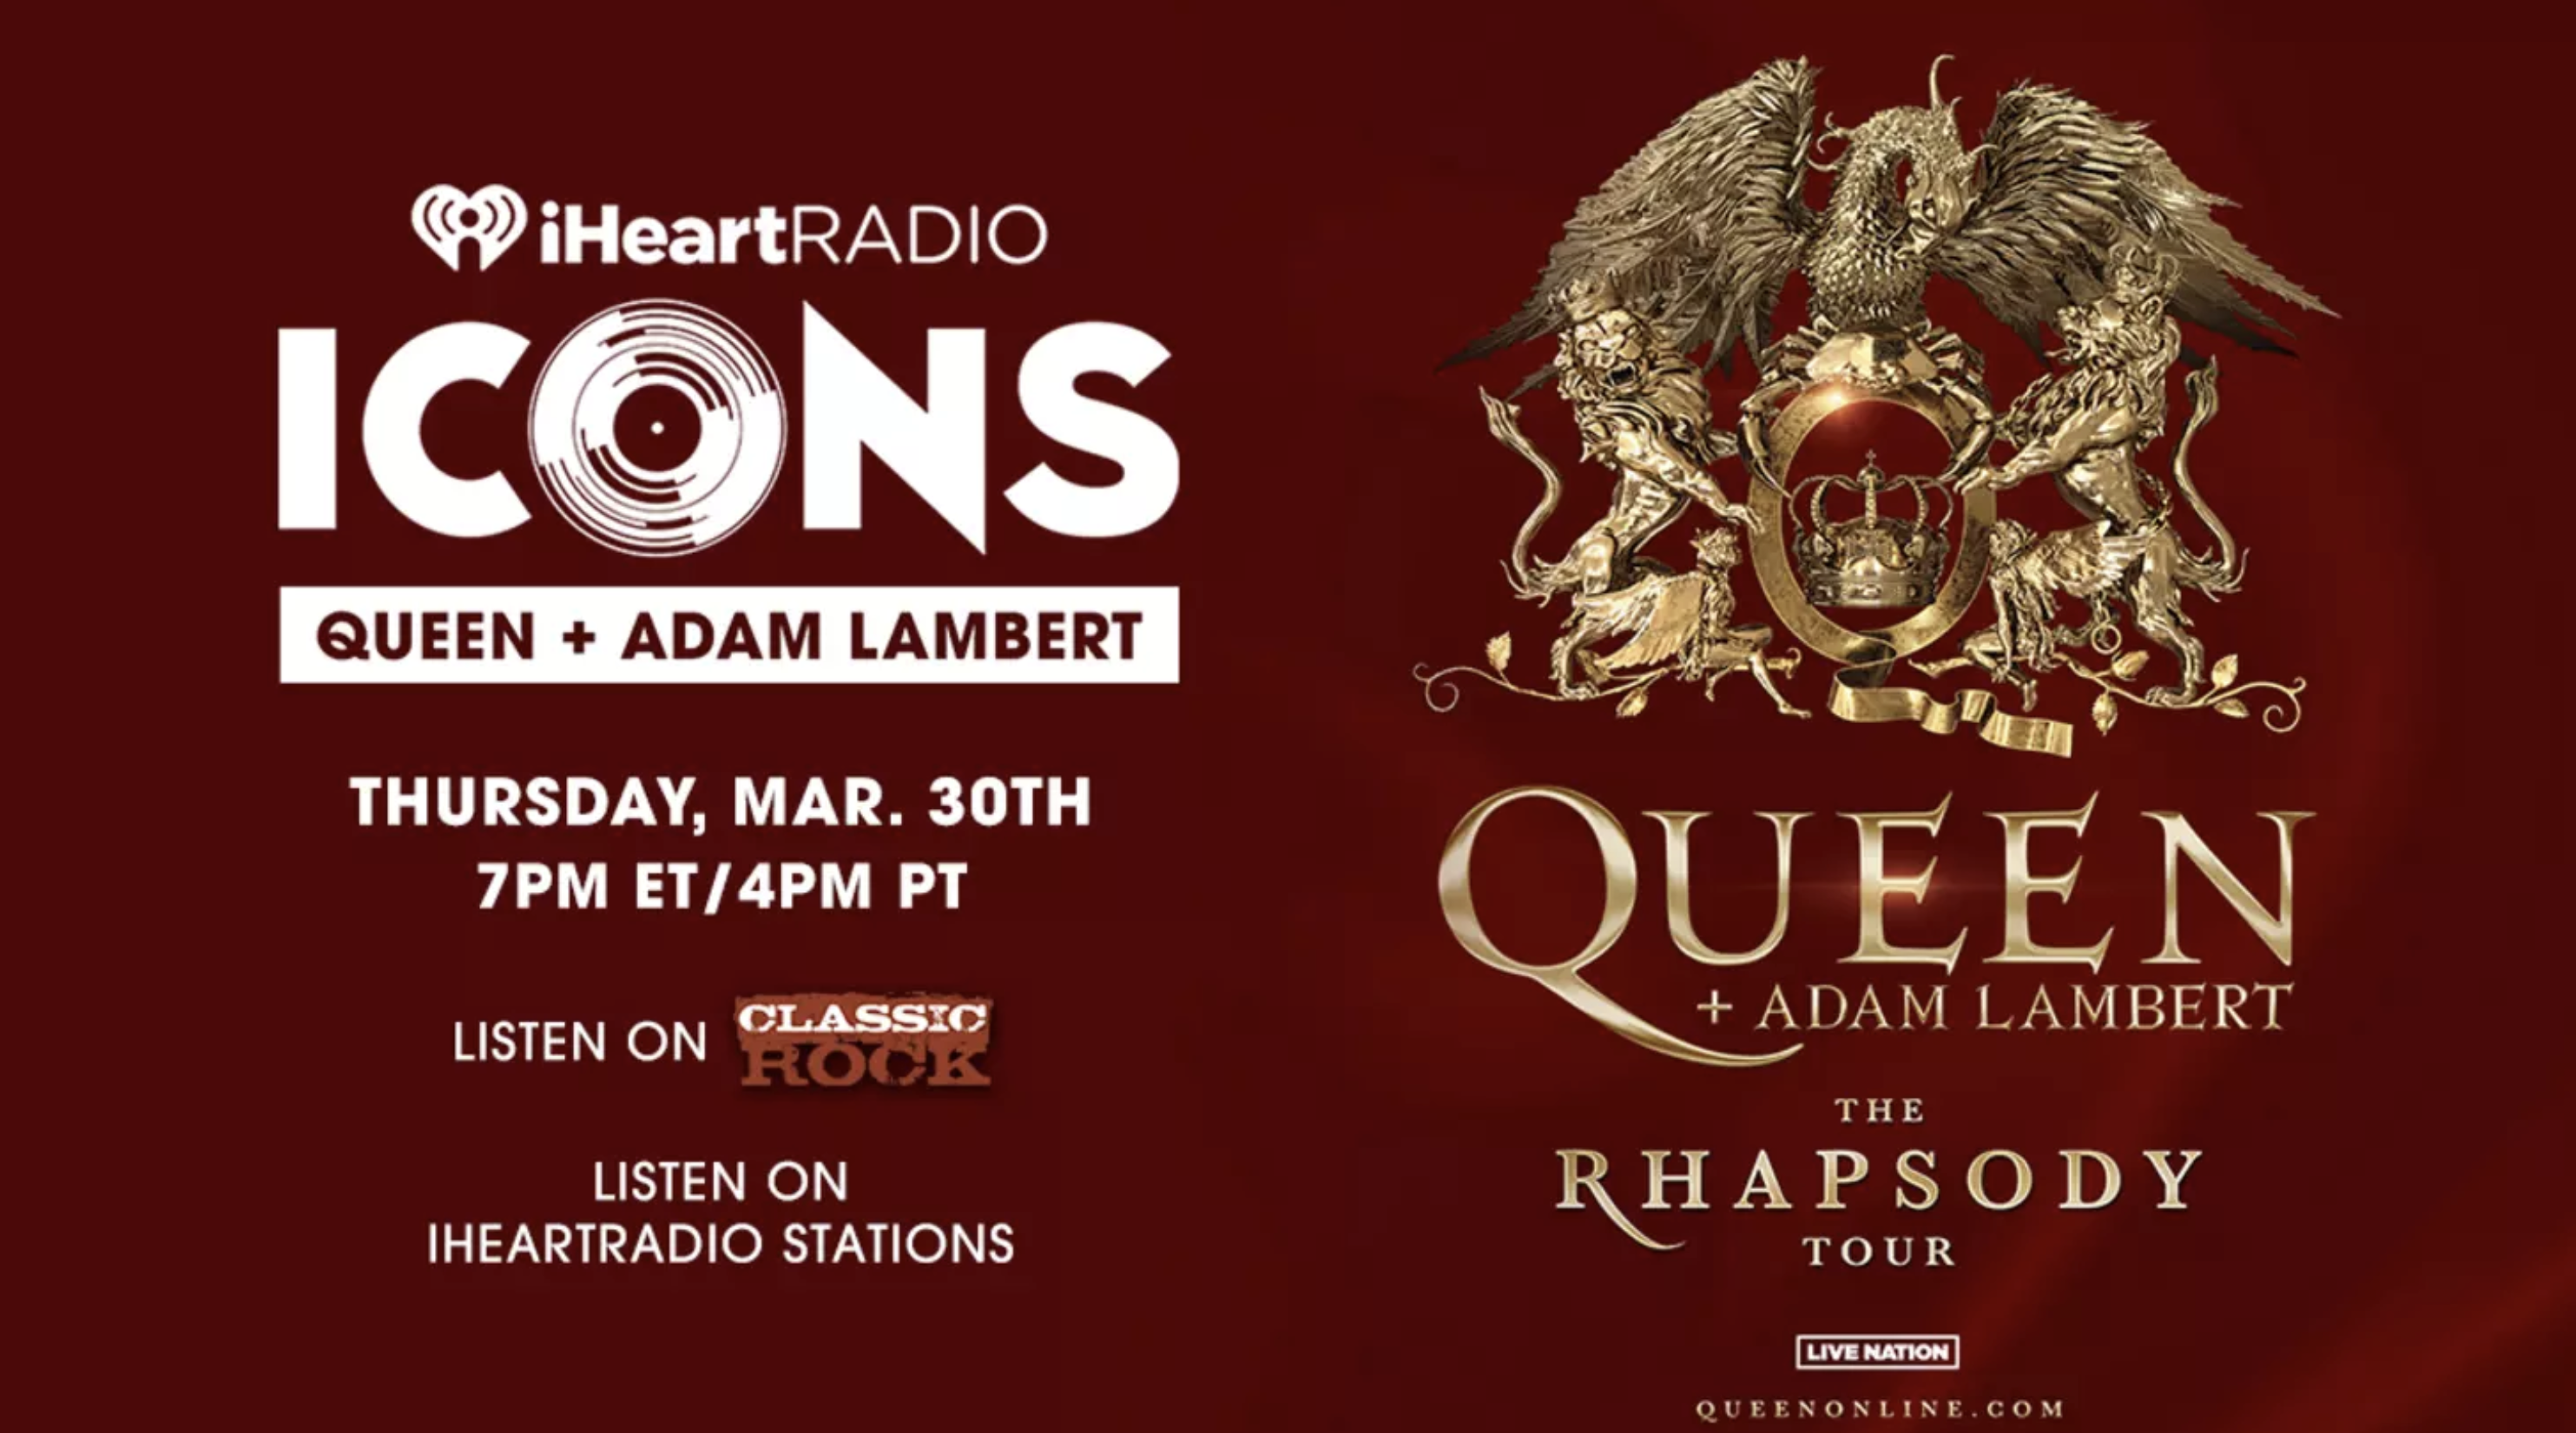 iheartradio icons with queen